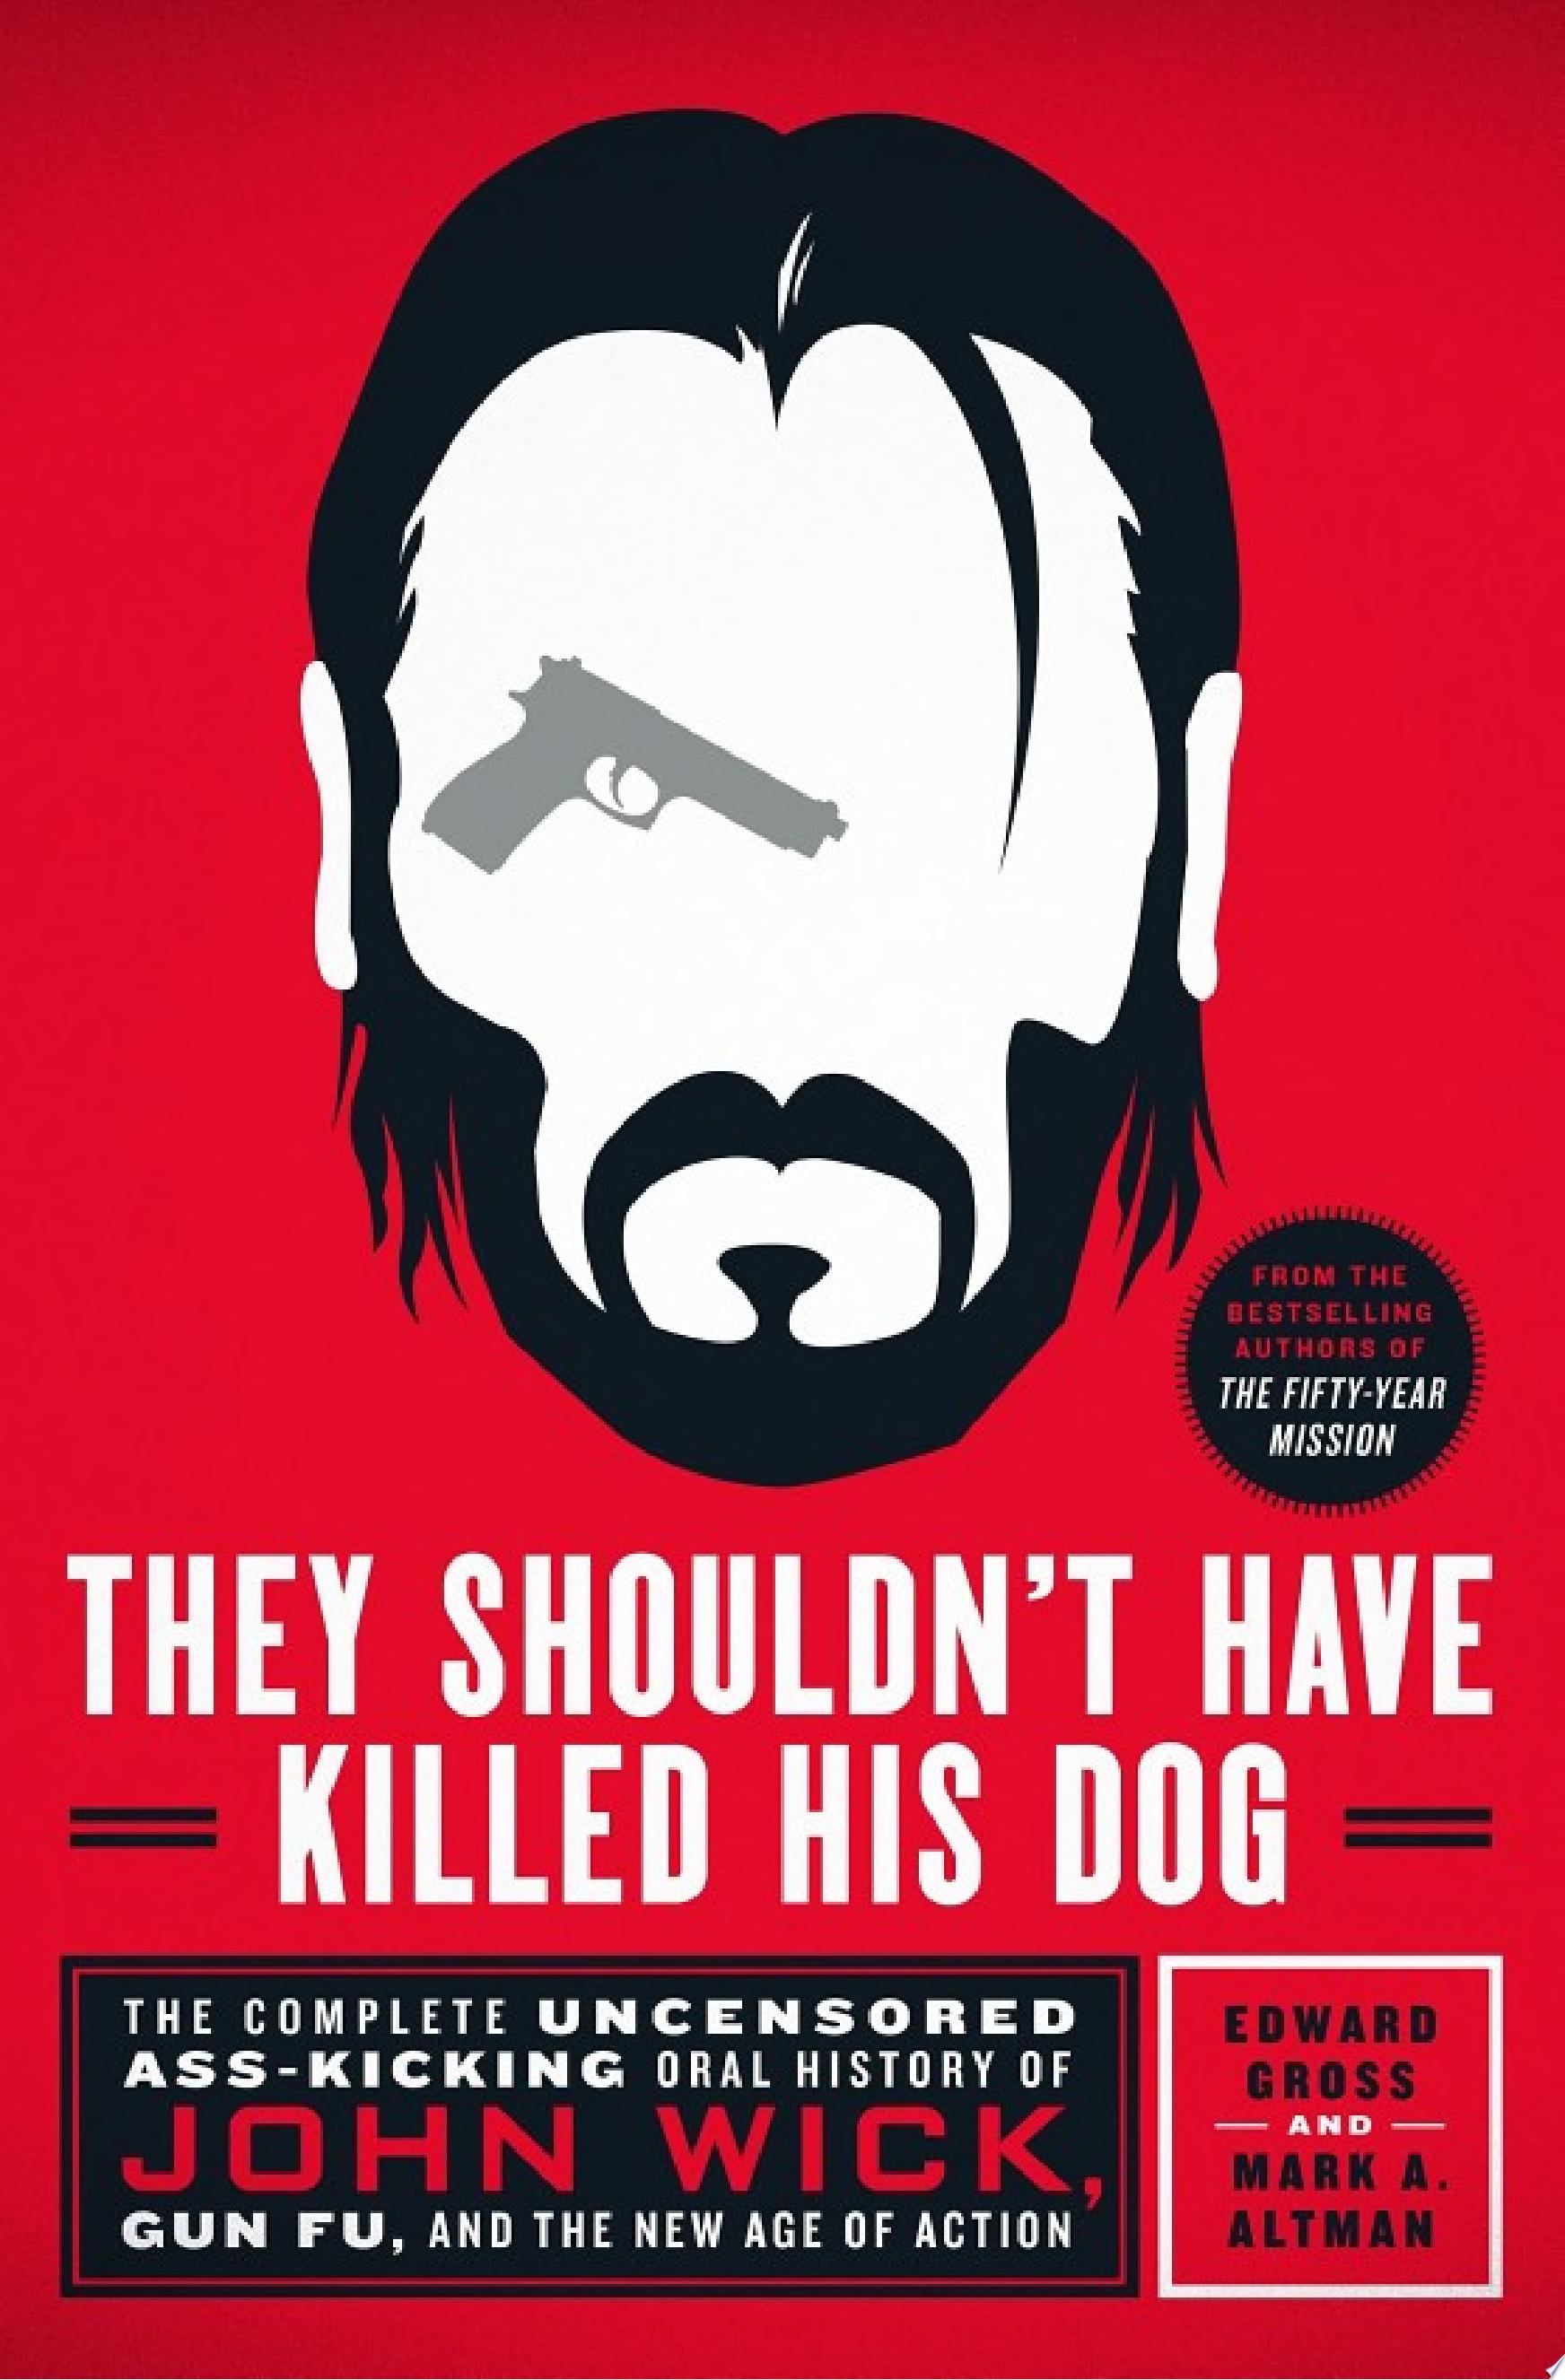 Image for "They Shouldn't Have Killed His Dog"